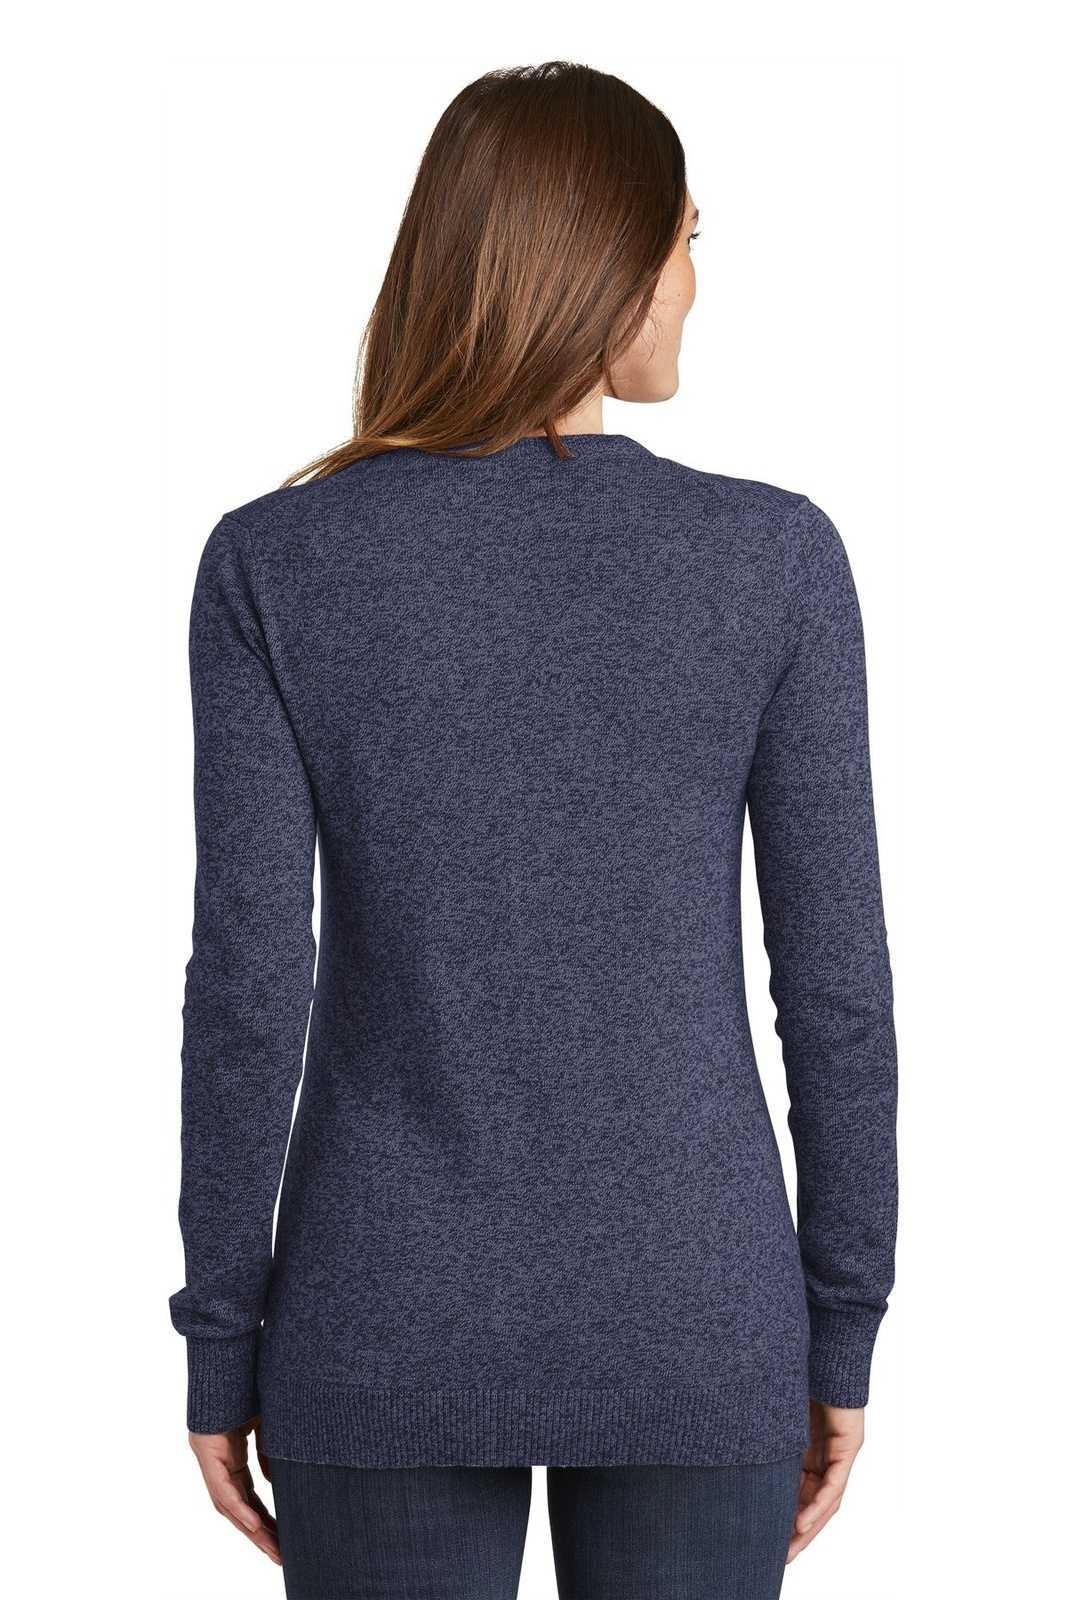 Port Authority LSW415 Ladies Marled Cardigan Sweater - Navy Marl - HIT a Double - 1